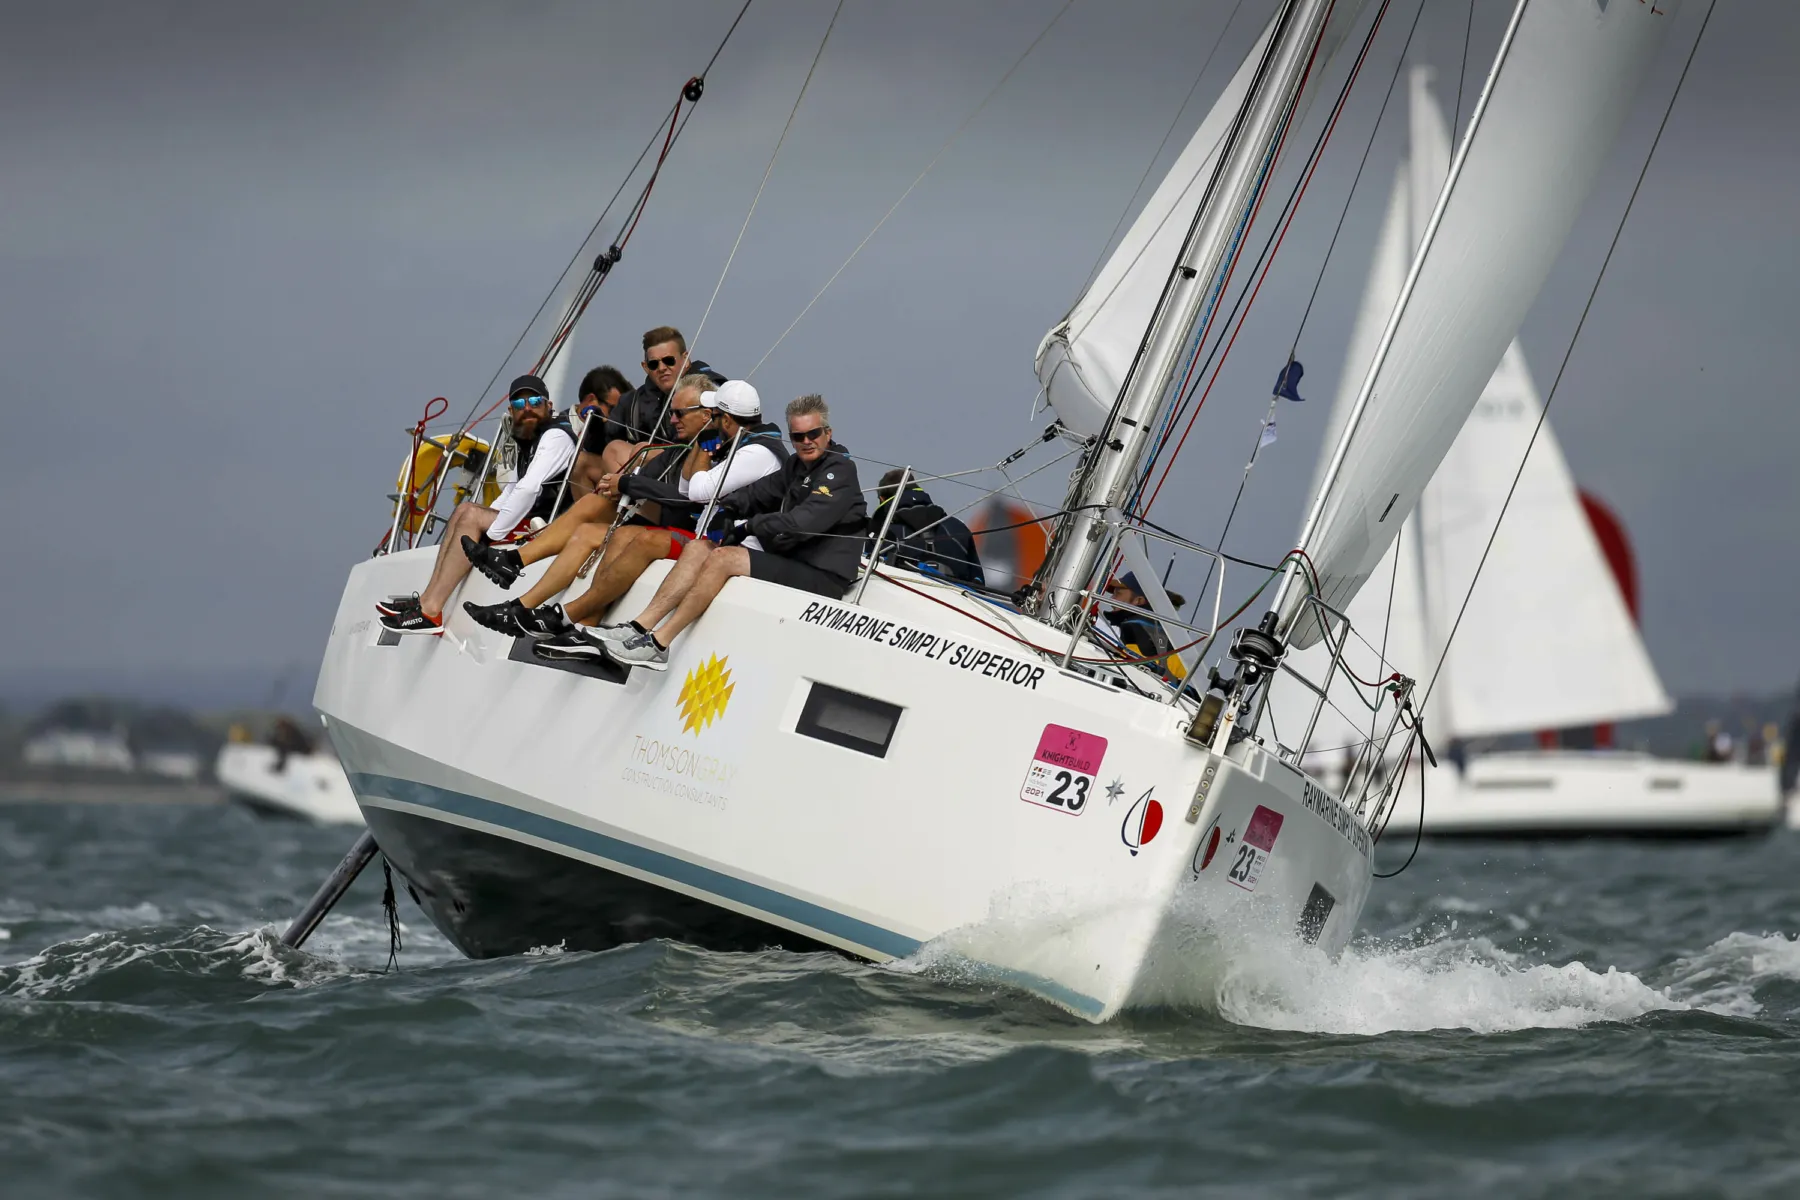 Members of the Thomson Gray Construction Consultants team on board a yacht sponsored by the firm in a sailing challenge - the Little Britain Challenge cup. The boat tilts to the side as it turns.